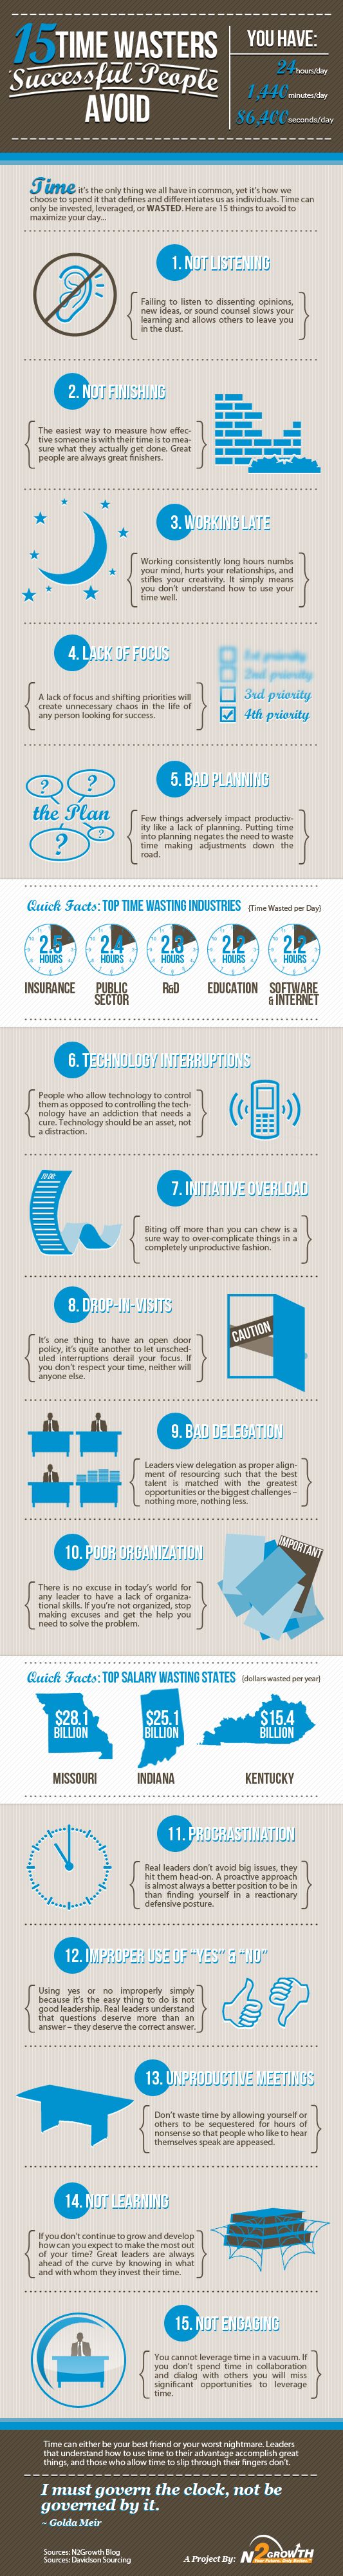 15 Time Wasters Successful People Avoid #infographic